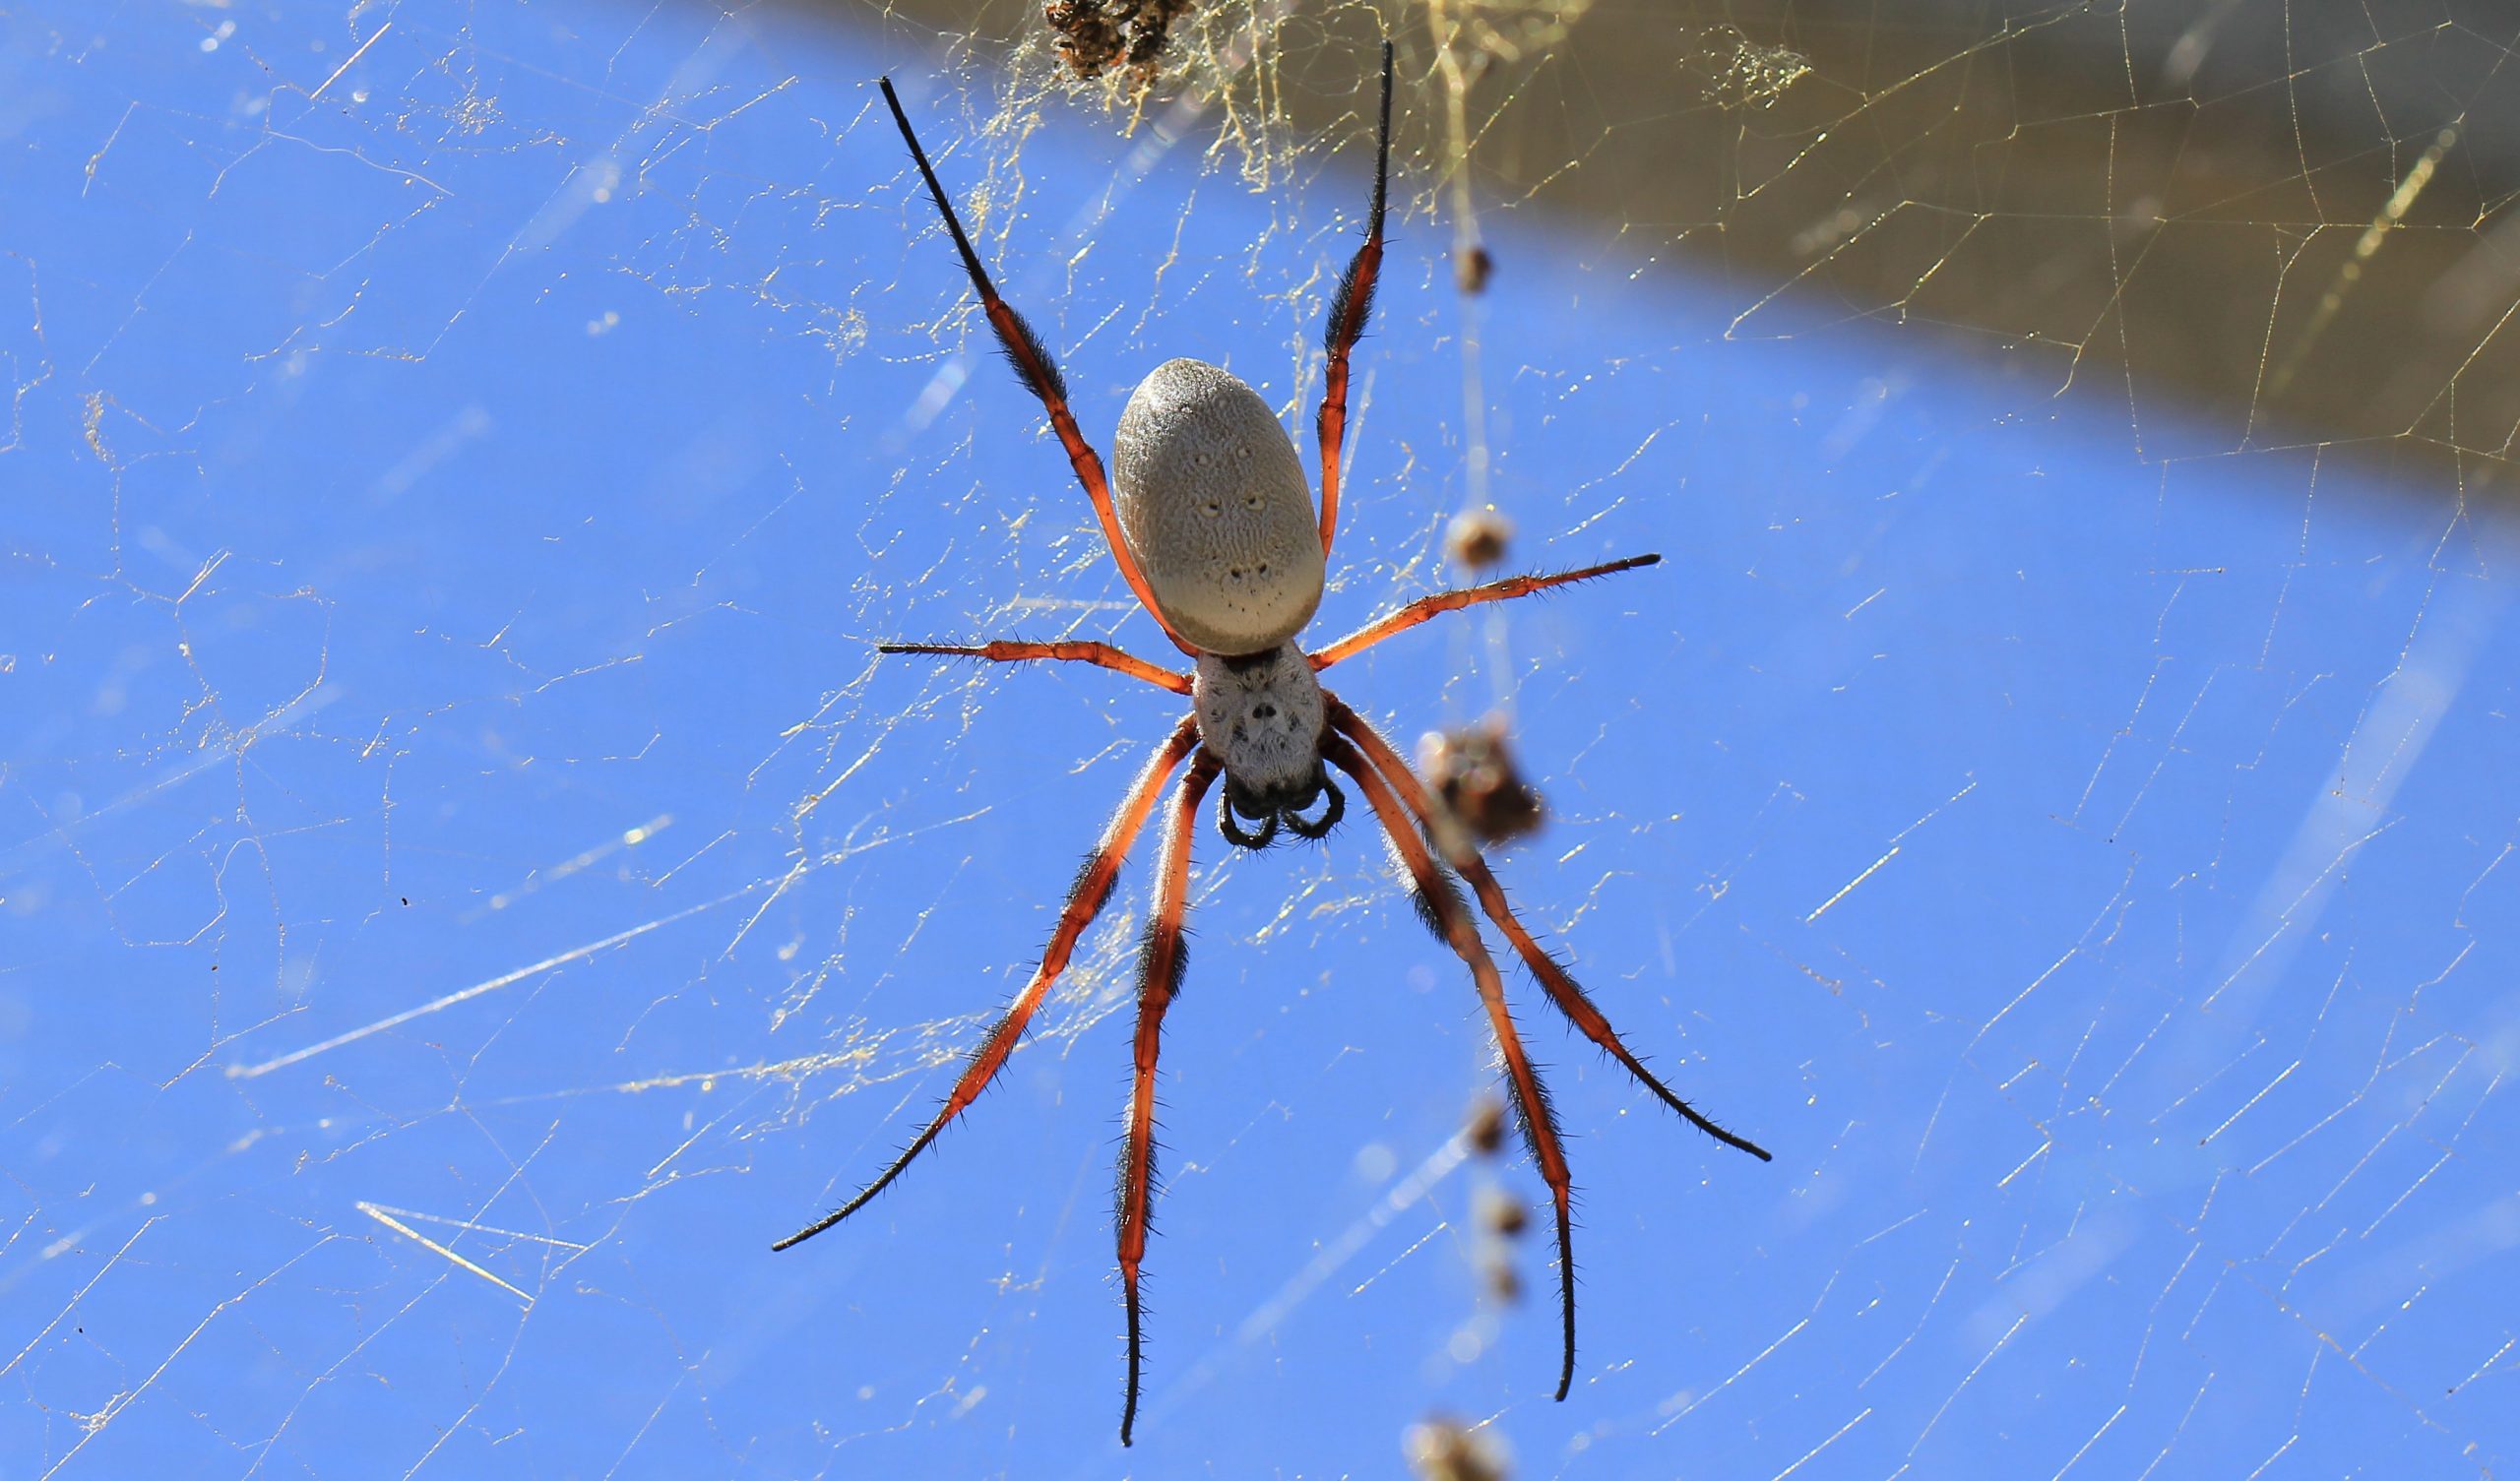 Blog  What Are Orb Weaver Spiders?